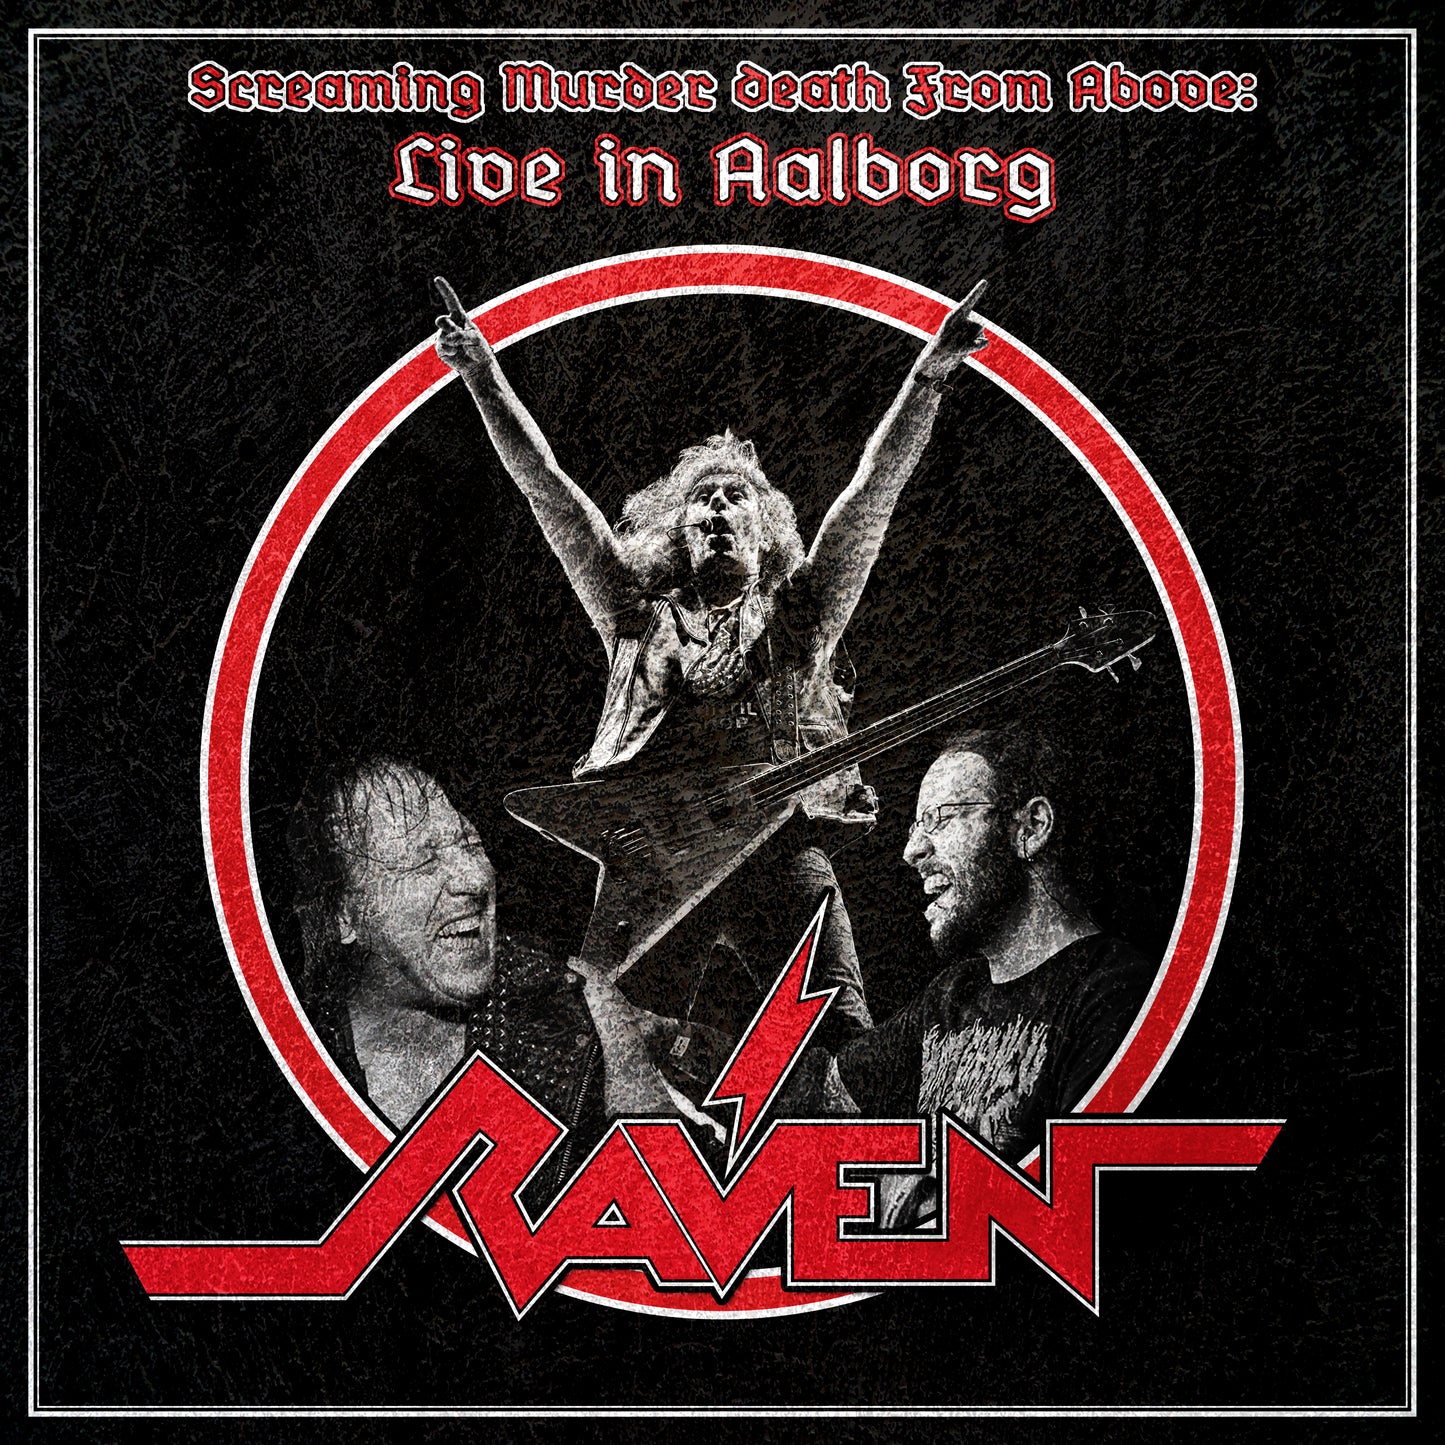 Raven "Screaming Murder Death From Above: Live In Aalborg" LP